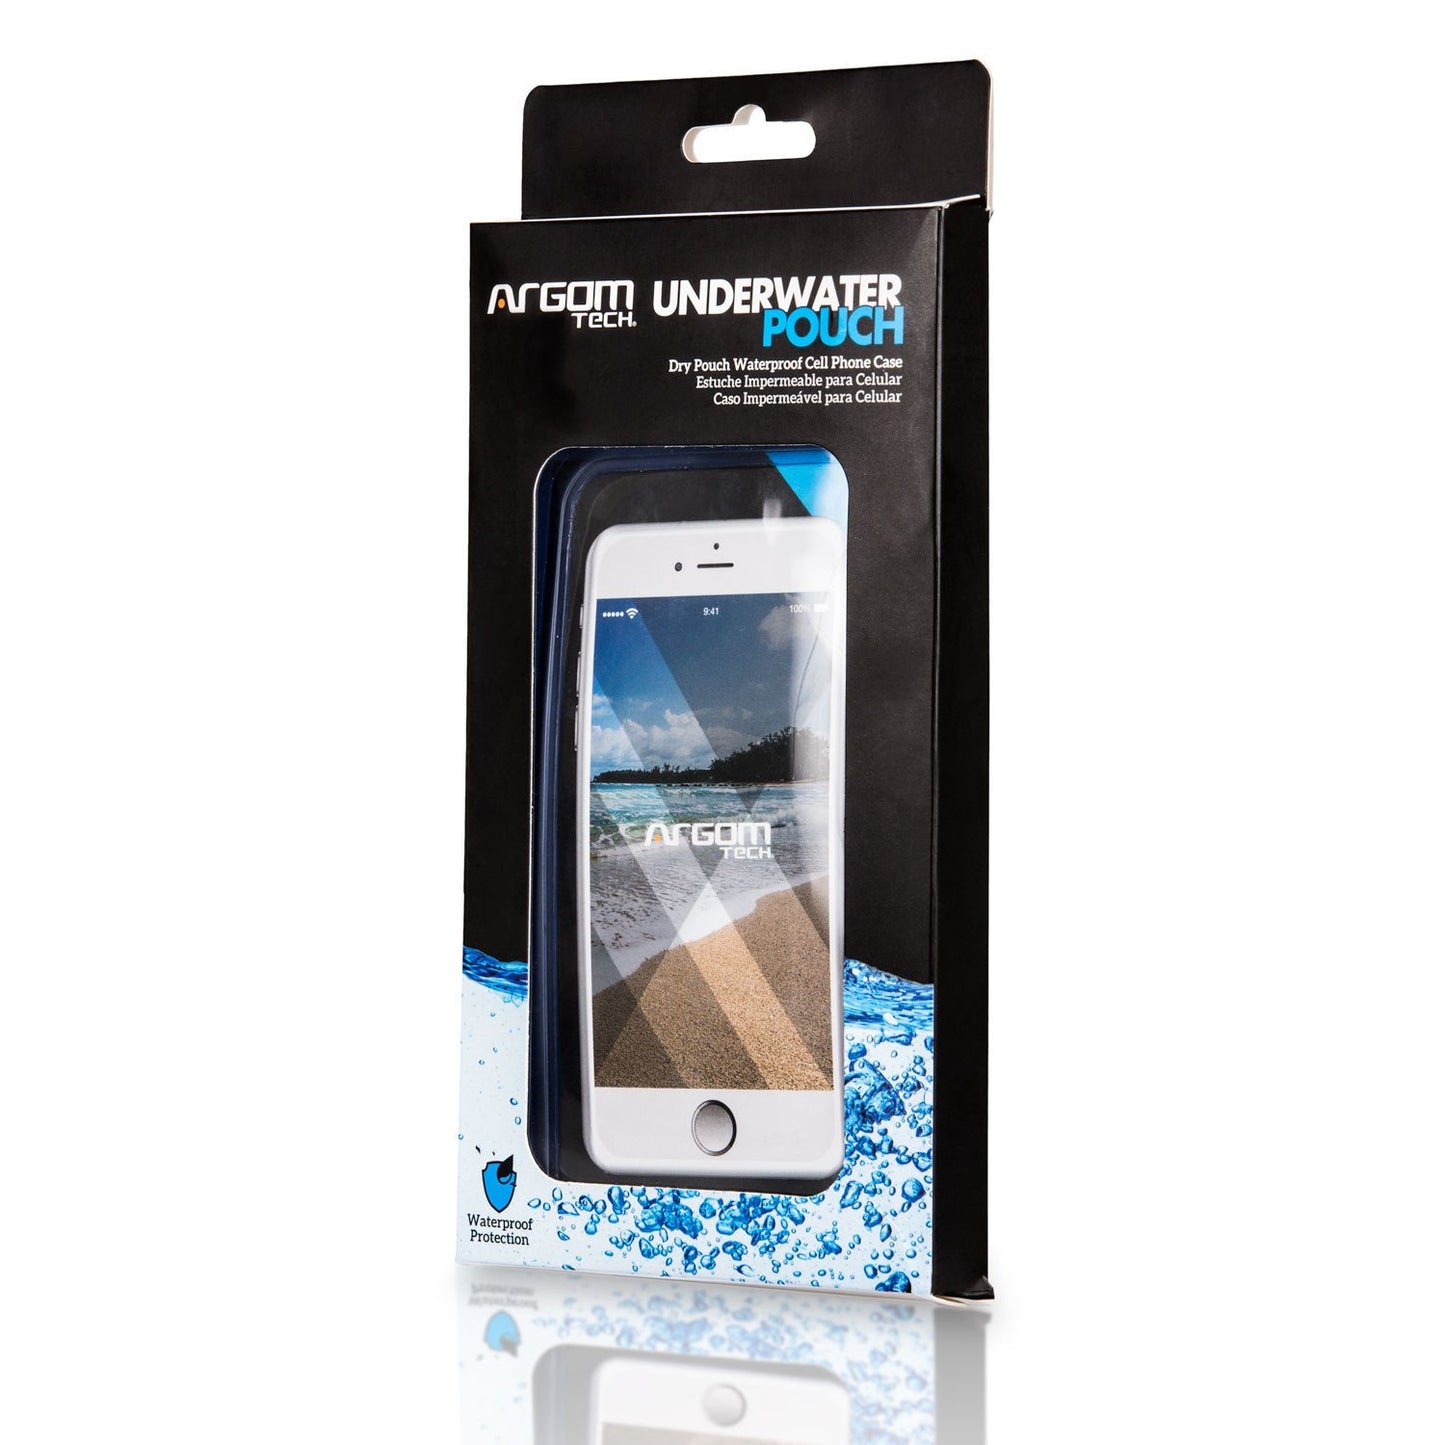 WATERPROOF CELL PHONE POUCH